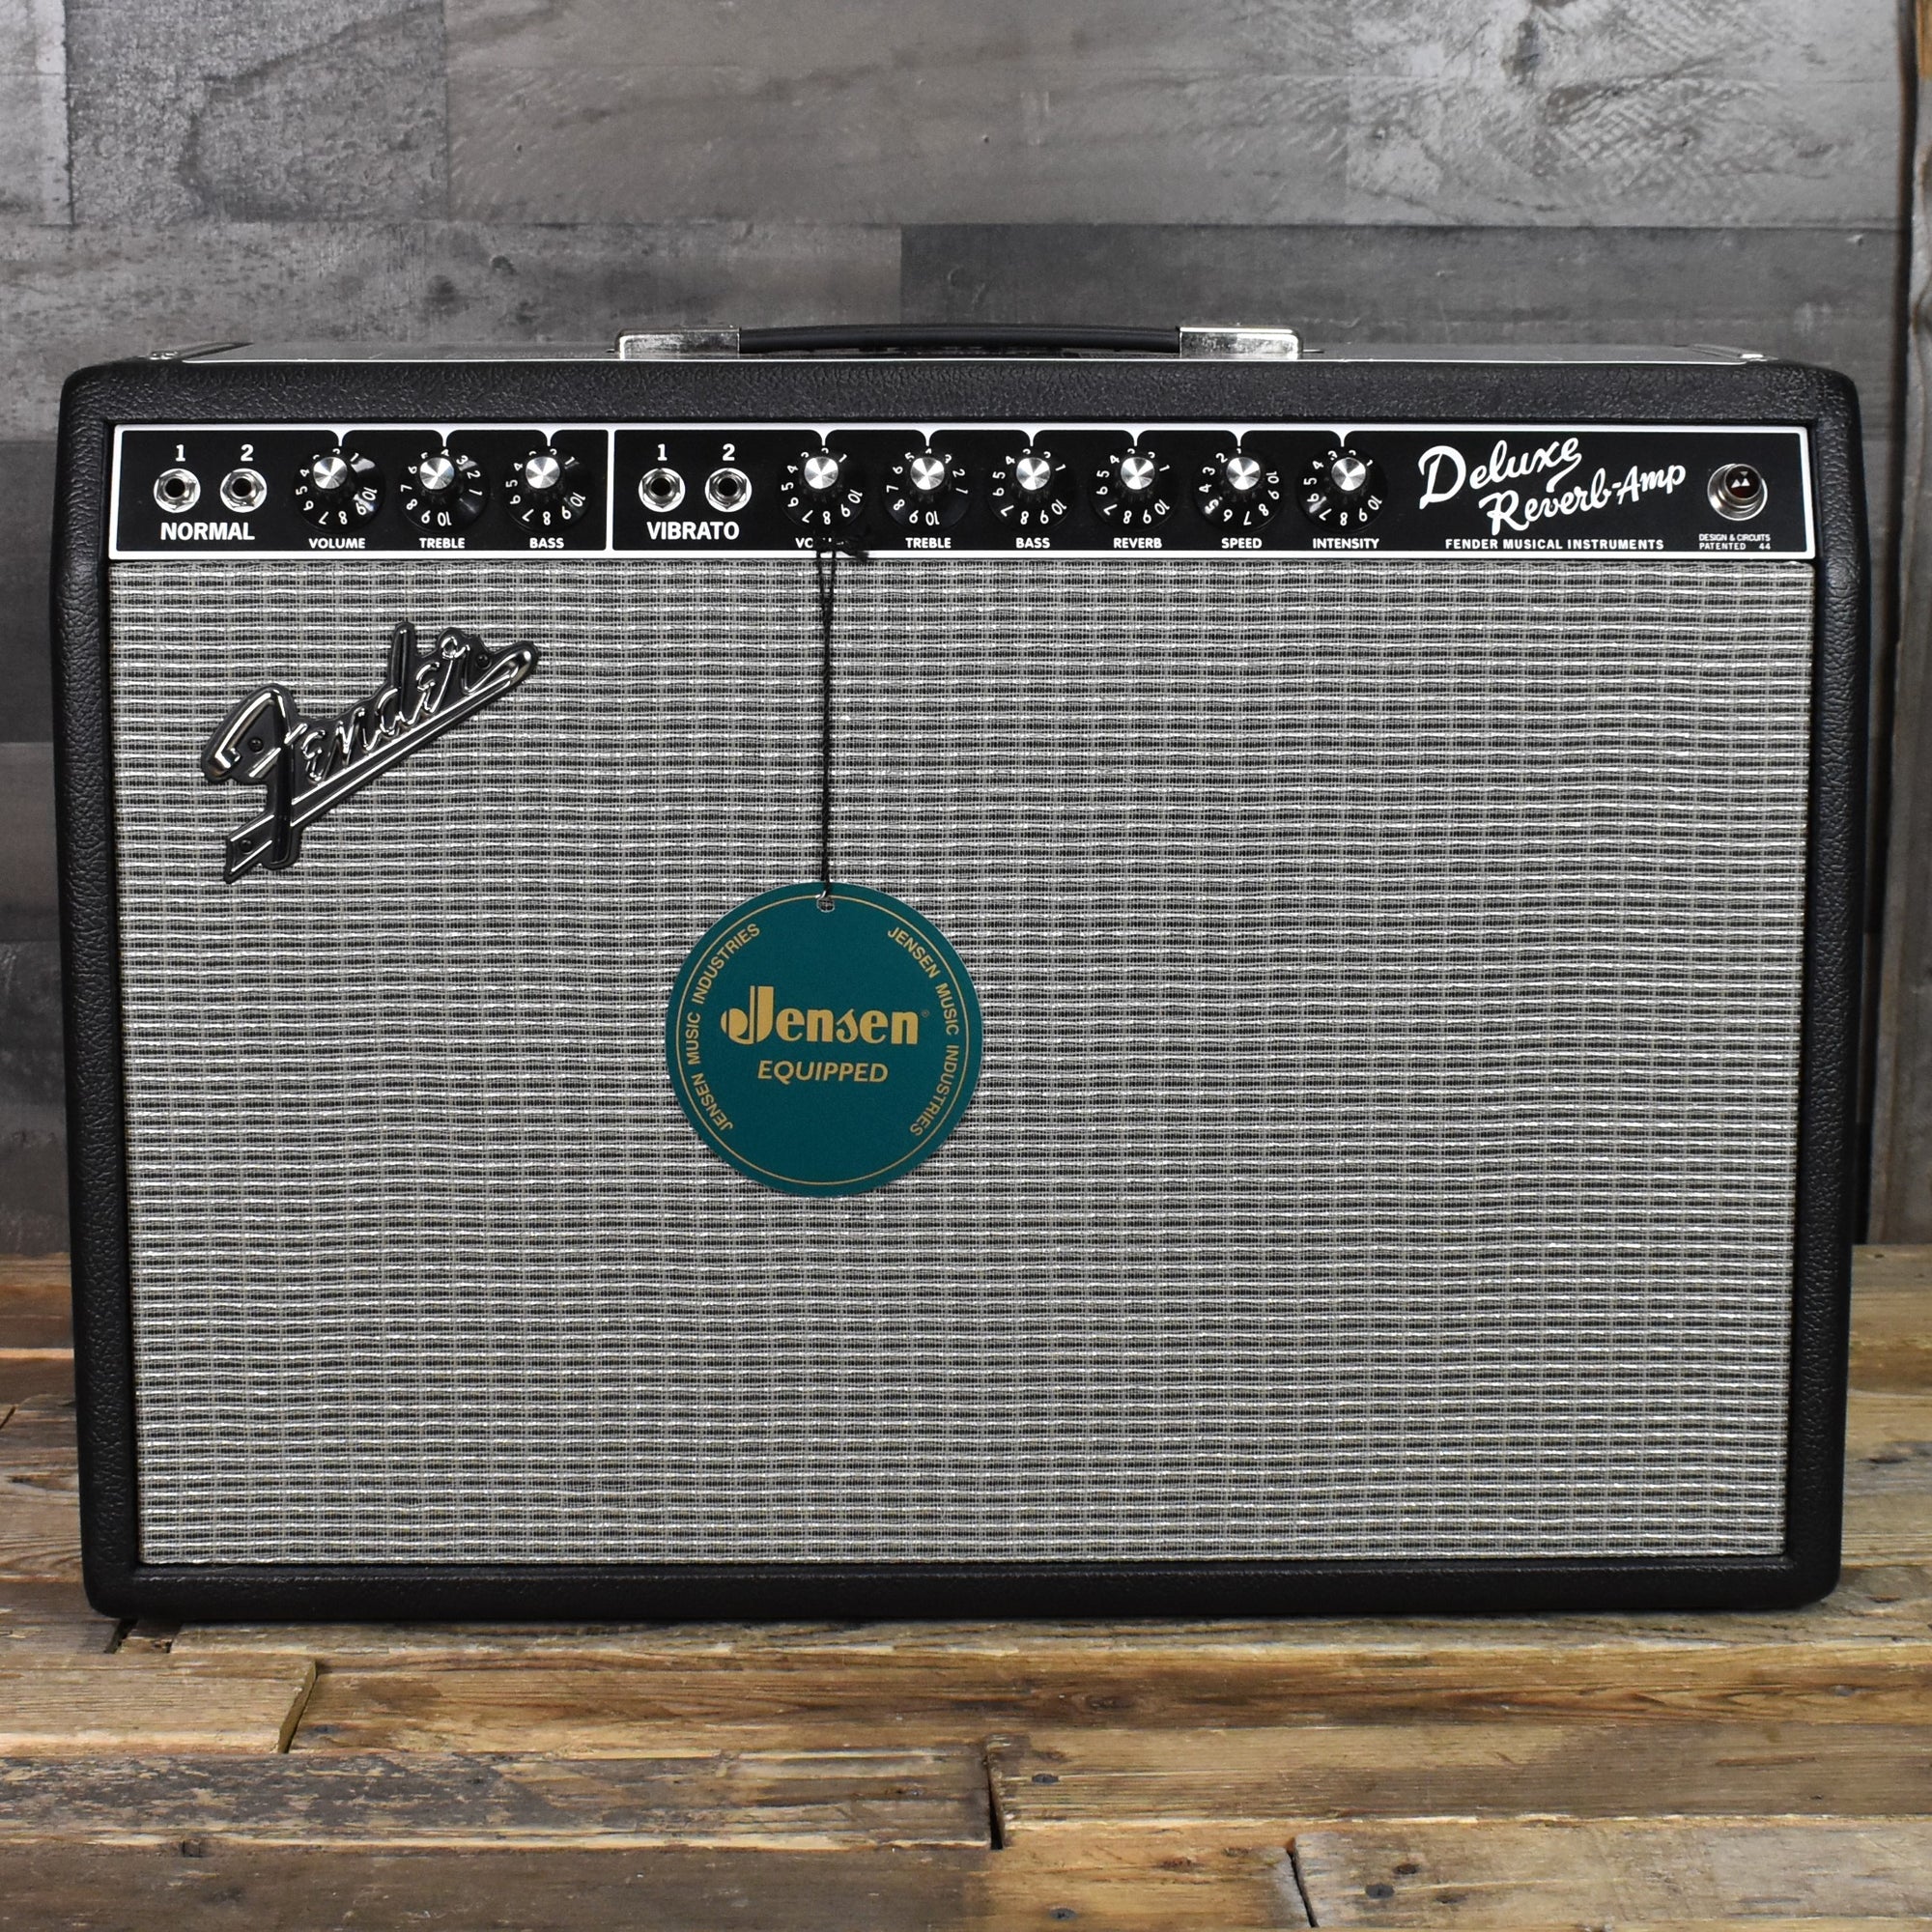 Pre-Owned '65 Deluxe Reverb Reissue - Five Star Guitars